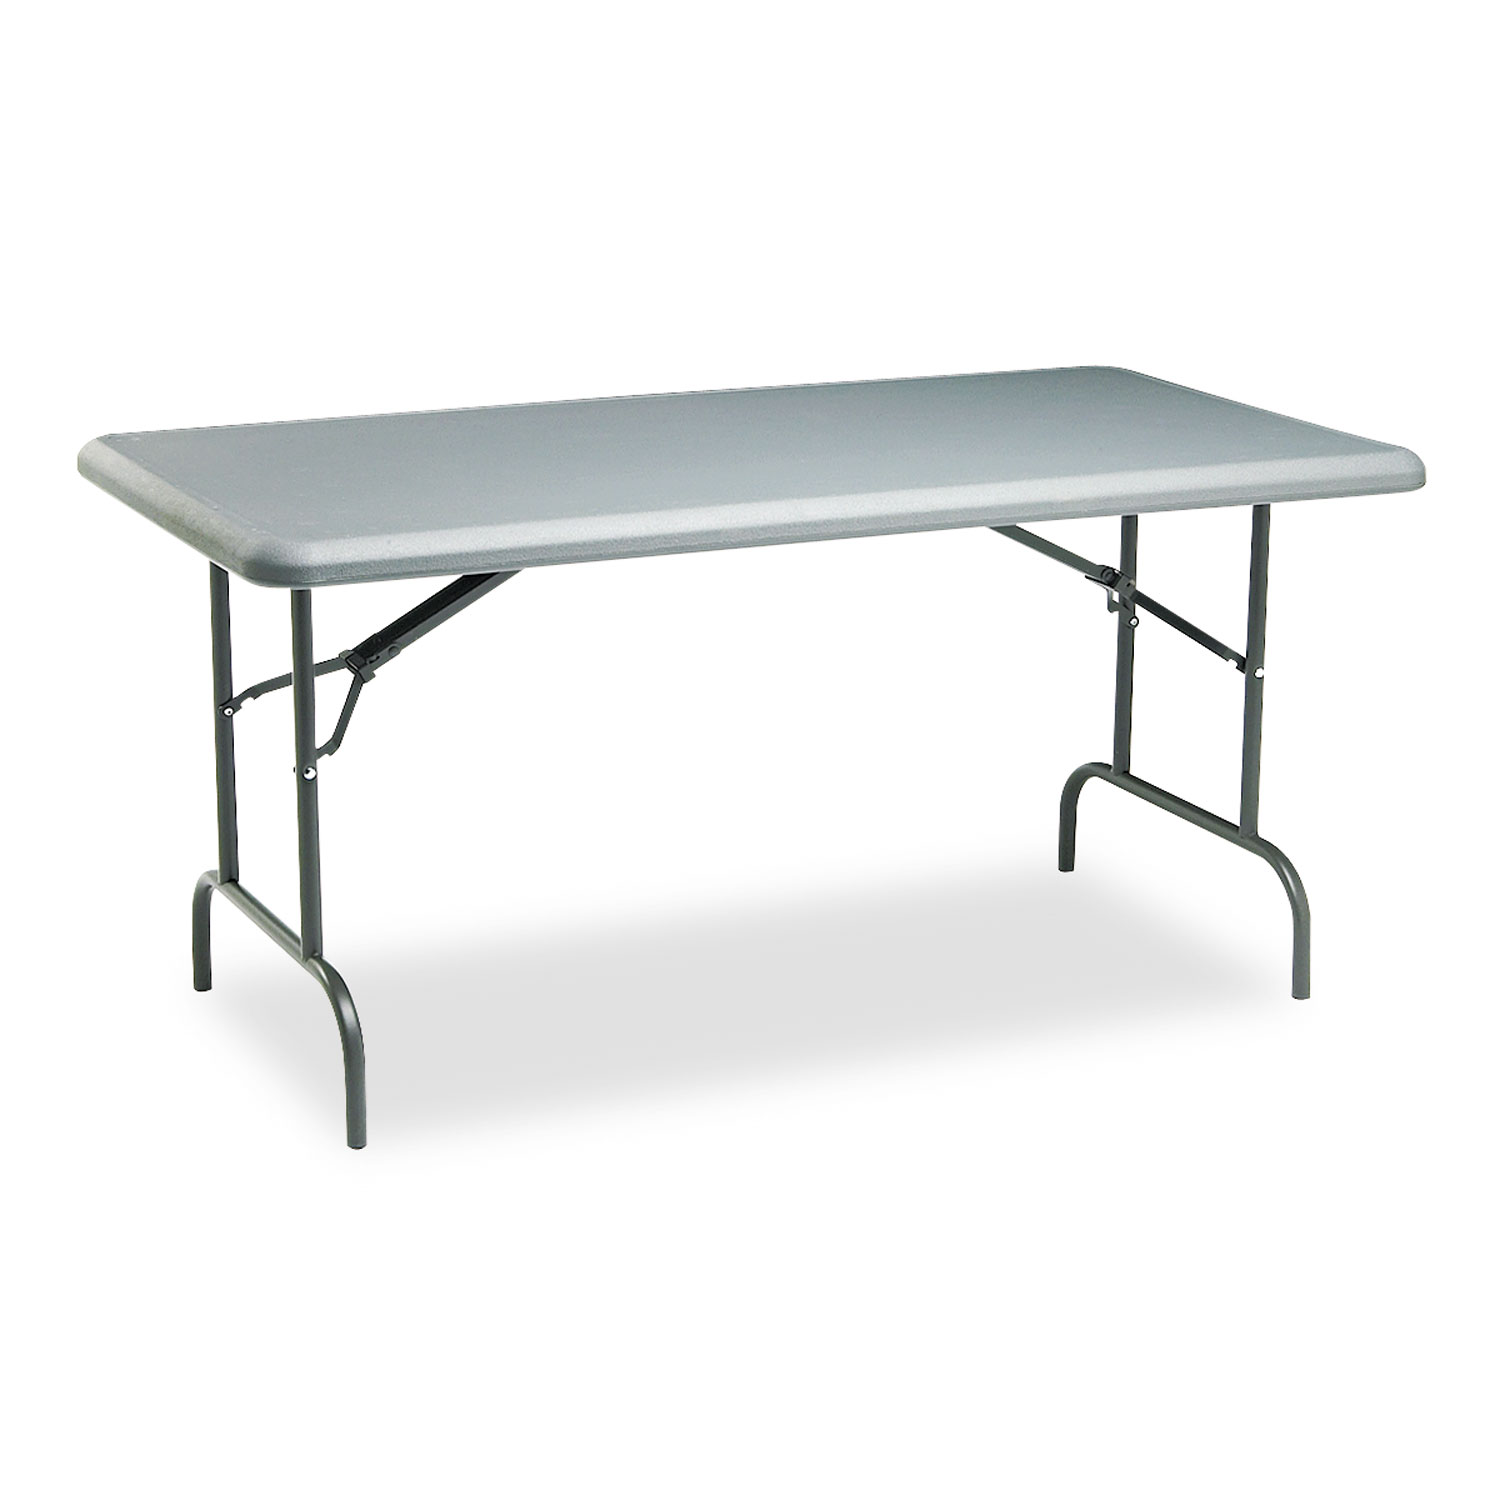  Iceberg 65217 IndestrucTables Too 1200 Series Folding Table, 60w x 30d x 29h, Charcoal (ICE65217) 